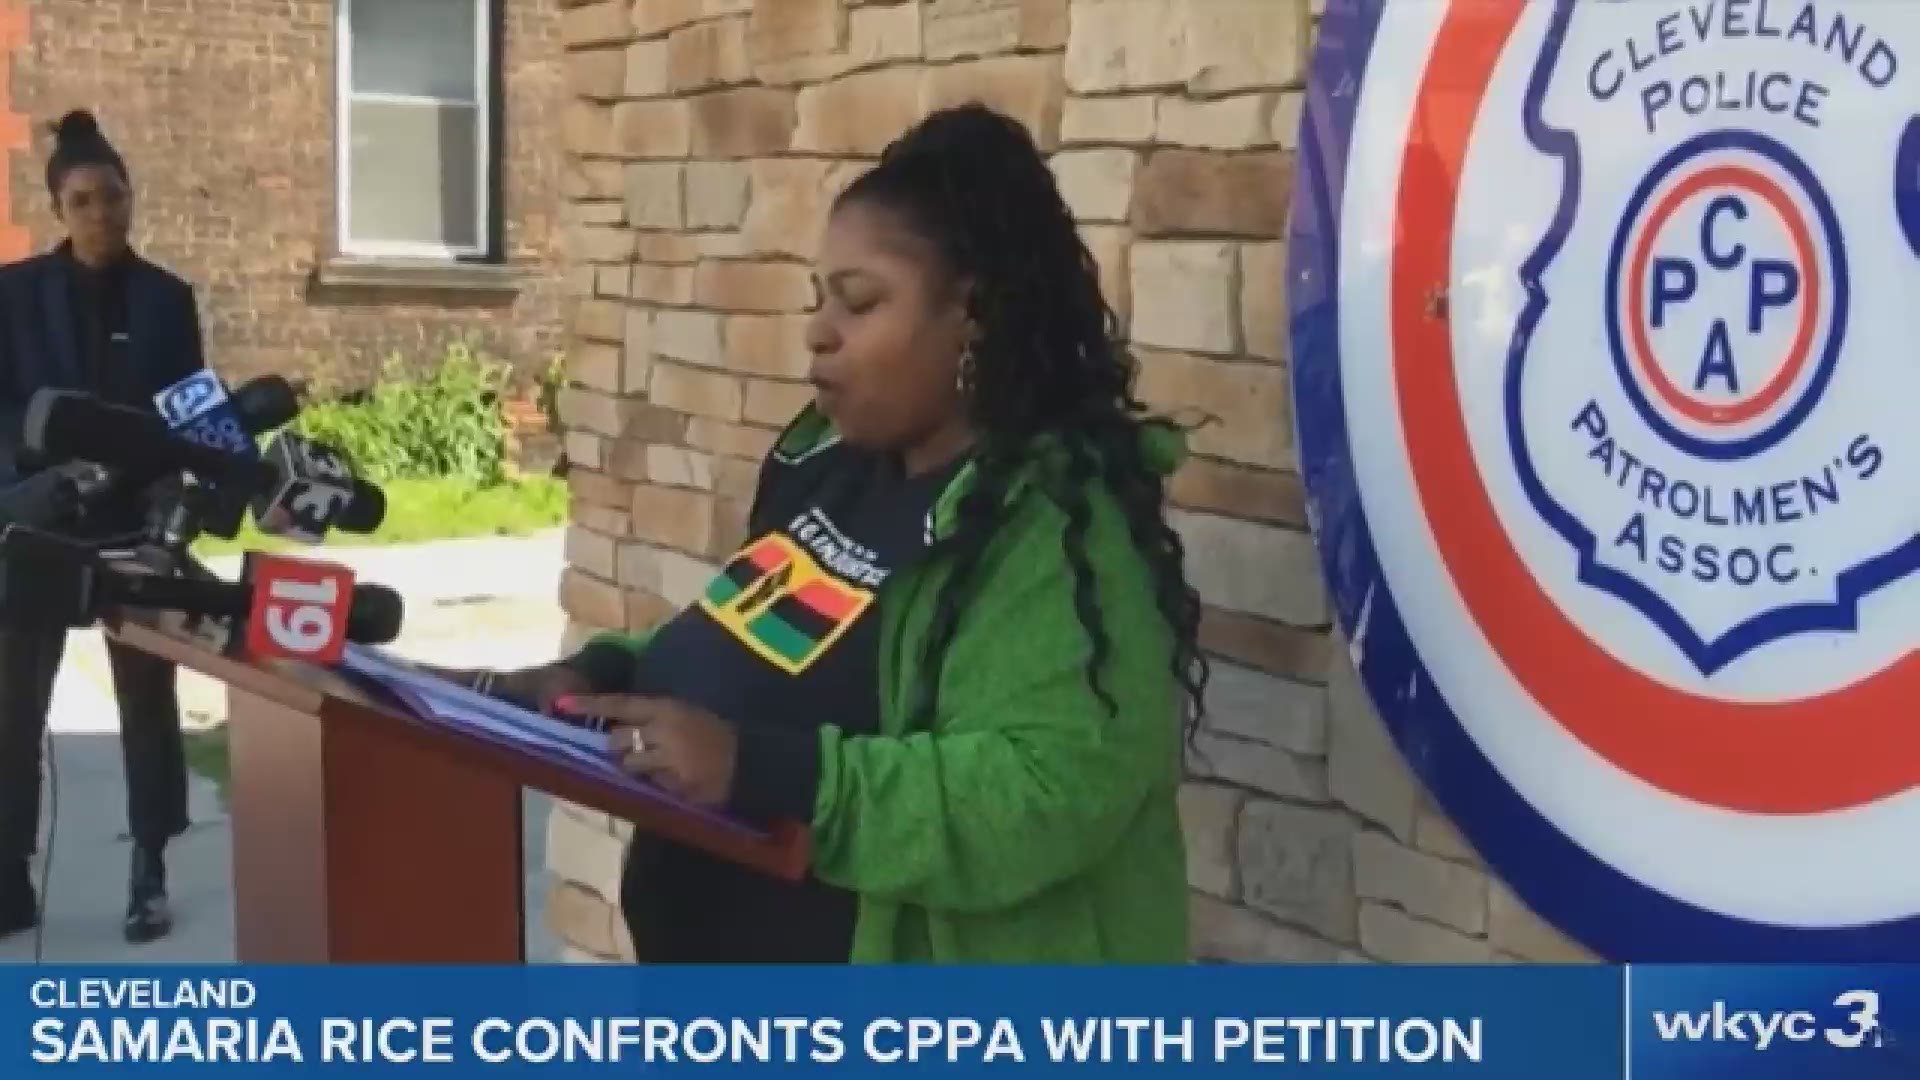 Samaria Rice, the mother of Tamir Rice, delivers petitions opposing the rehiring of the police officer who shot and killed her son in 2014.